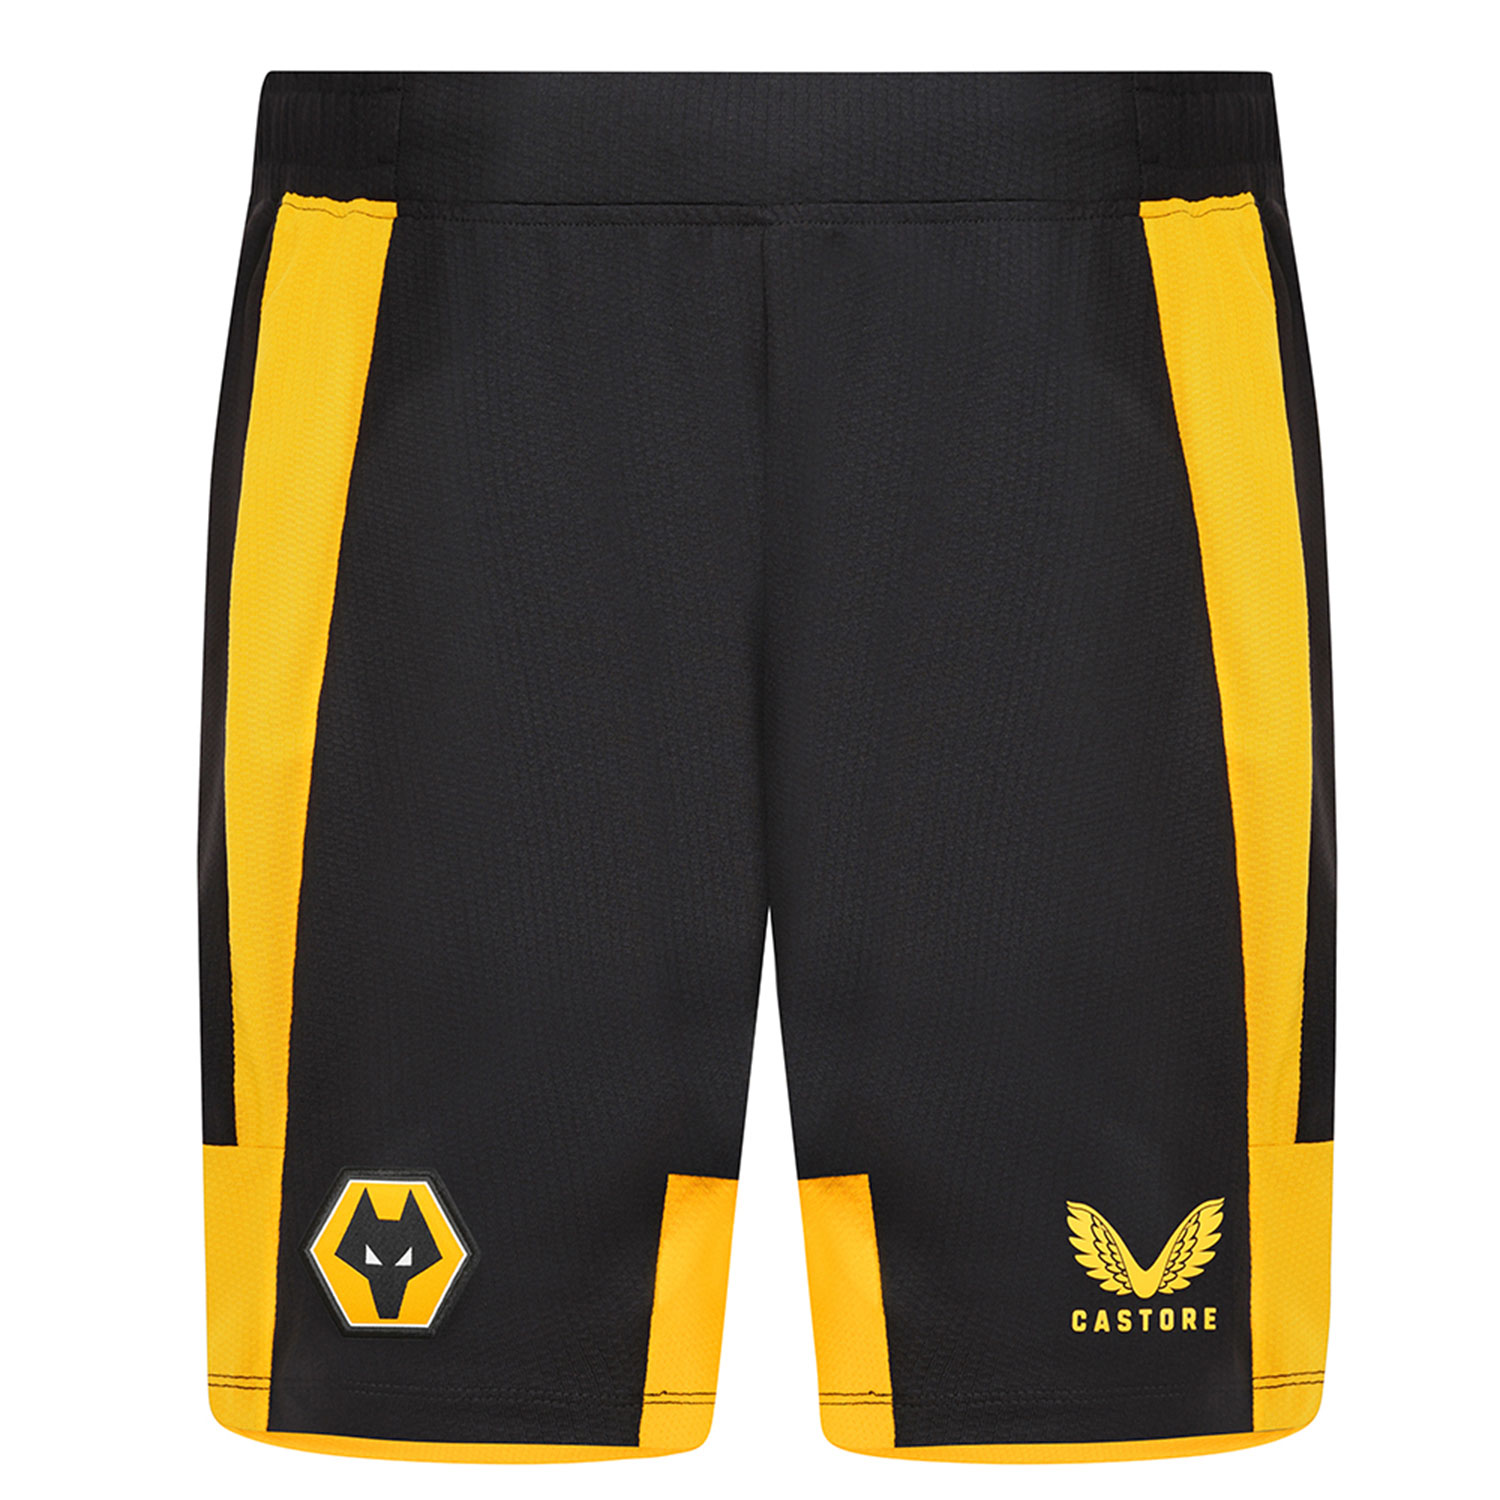 2022-23 Wolves Pro Home Shorts - Adult
Be Part Of the Pack, with the 2022-23 Wolves Pro Home shorts and show your pride on the street and in the stands.
The Authentic design is the same worn by the players on the field.
Featuring detailed colour matching and dyeing to be true Wolves Gold and bring it back home to the club and fans.

Contrast side and hem panel to mimic the shirt
Drawstring fastening
Featuring the Castore logo in Wolves Gold
Woven coloured Wolves crest.
100% recycled polyester
